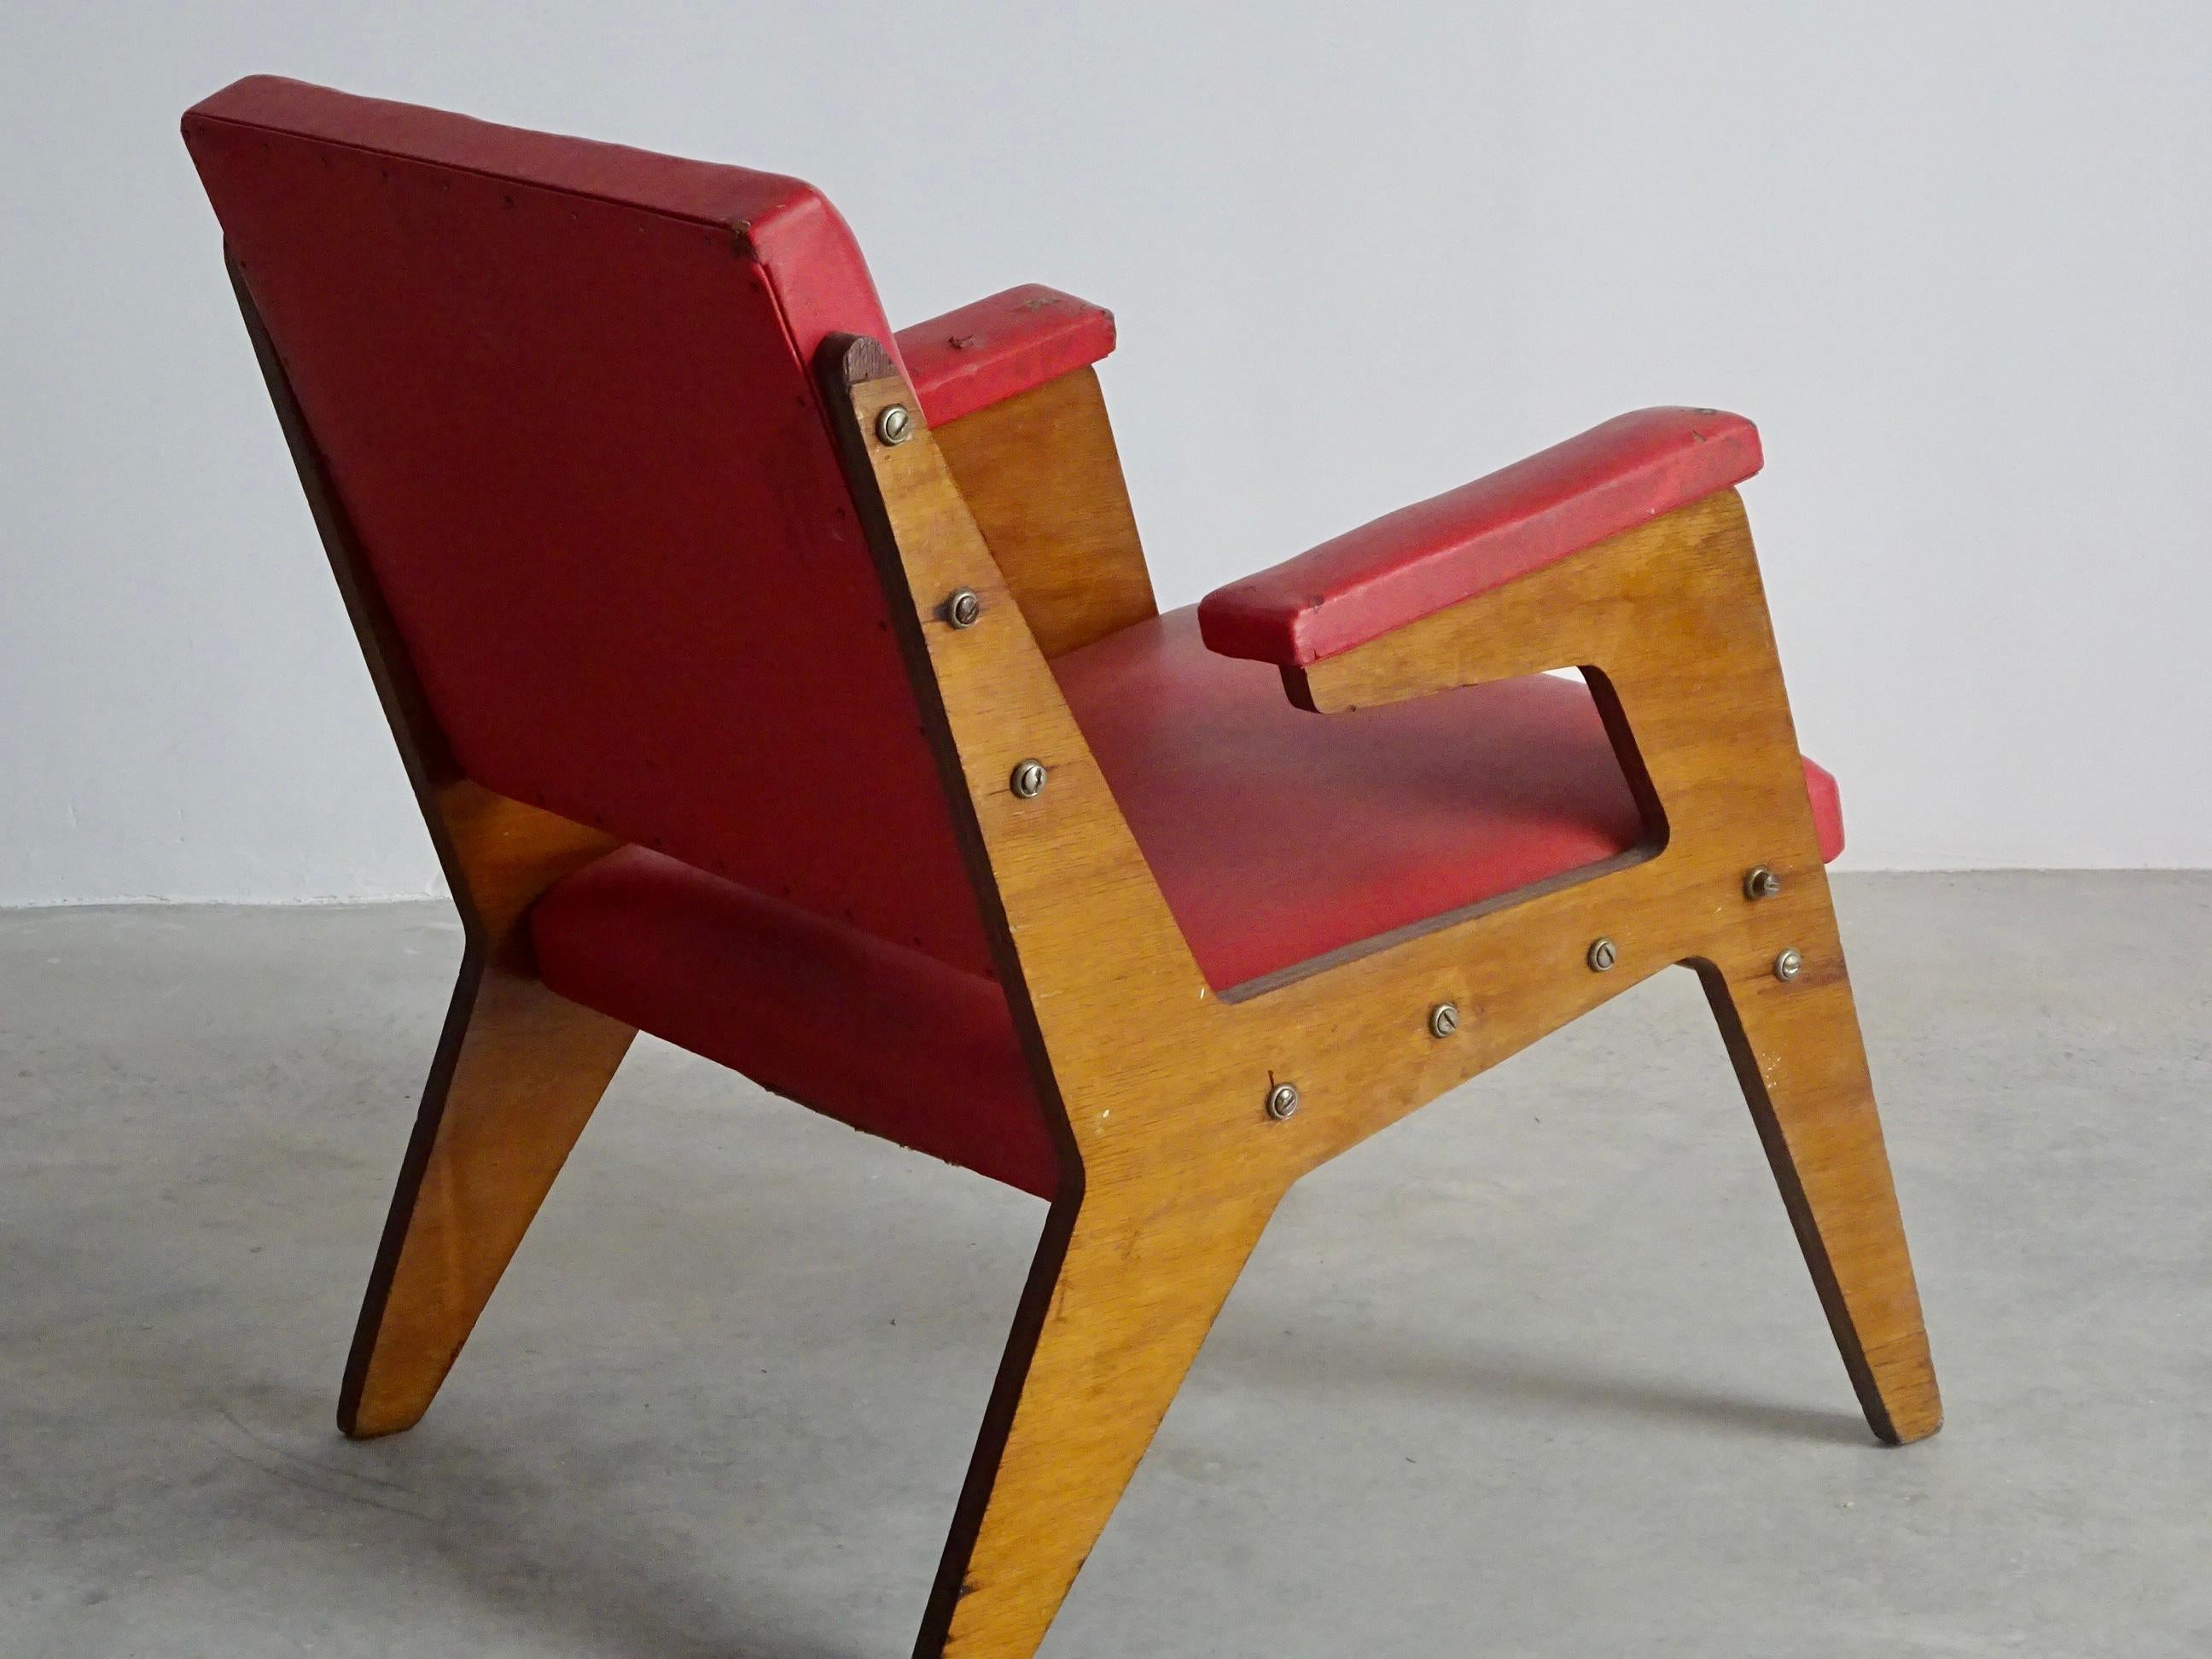 Armchair designed by José Zanine Caldas, produced by “Móveis Artísticos Z” in São Paulo (Brazil), 1950’s. Original condition, strong plywood structure with the usual wear and tear of time, red upholstery with some small tears, screws are the